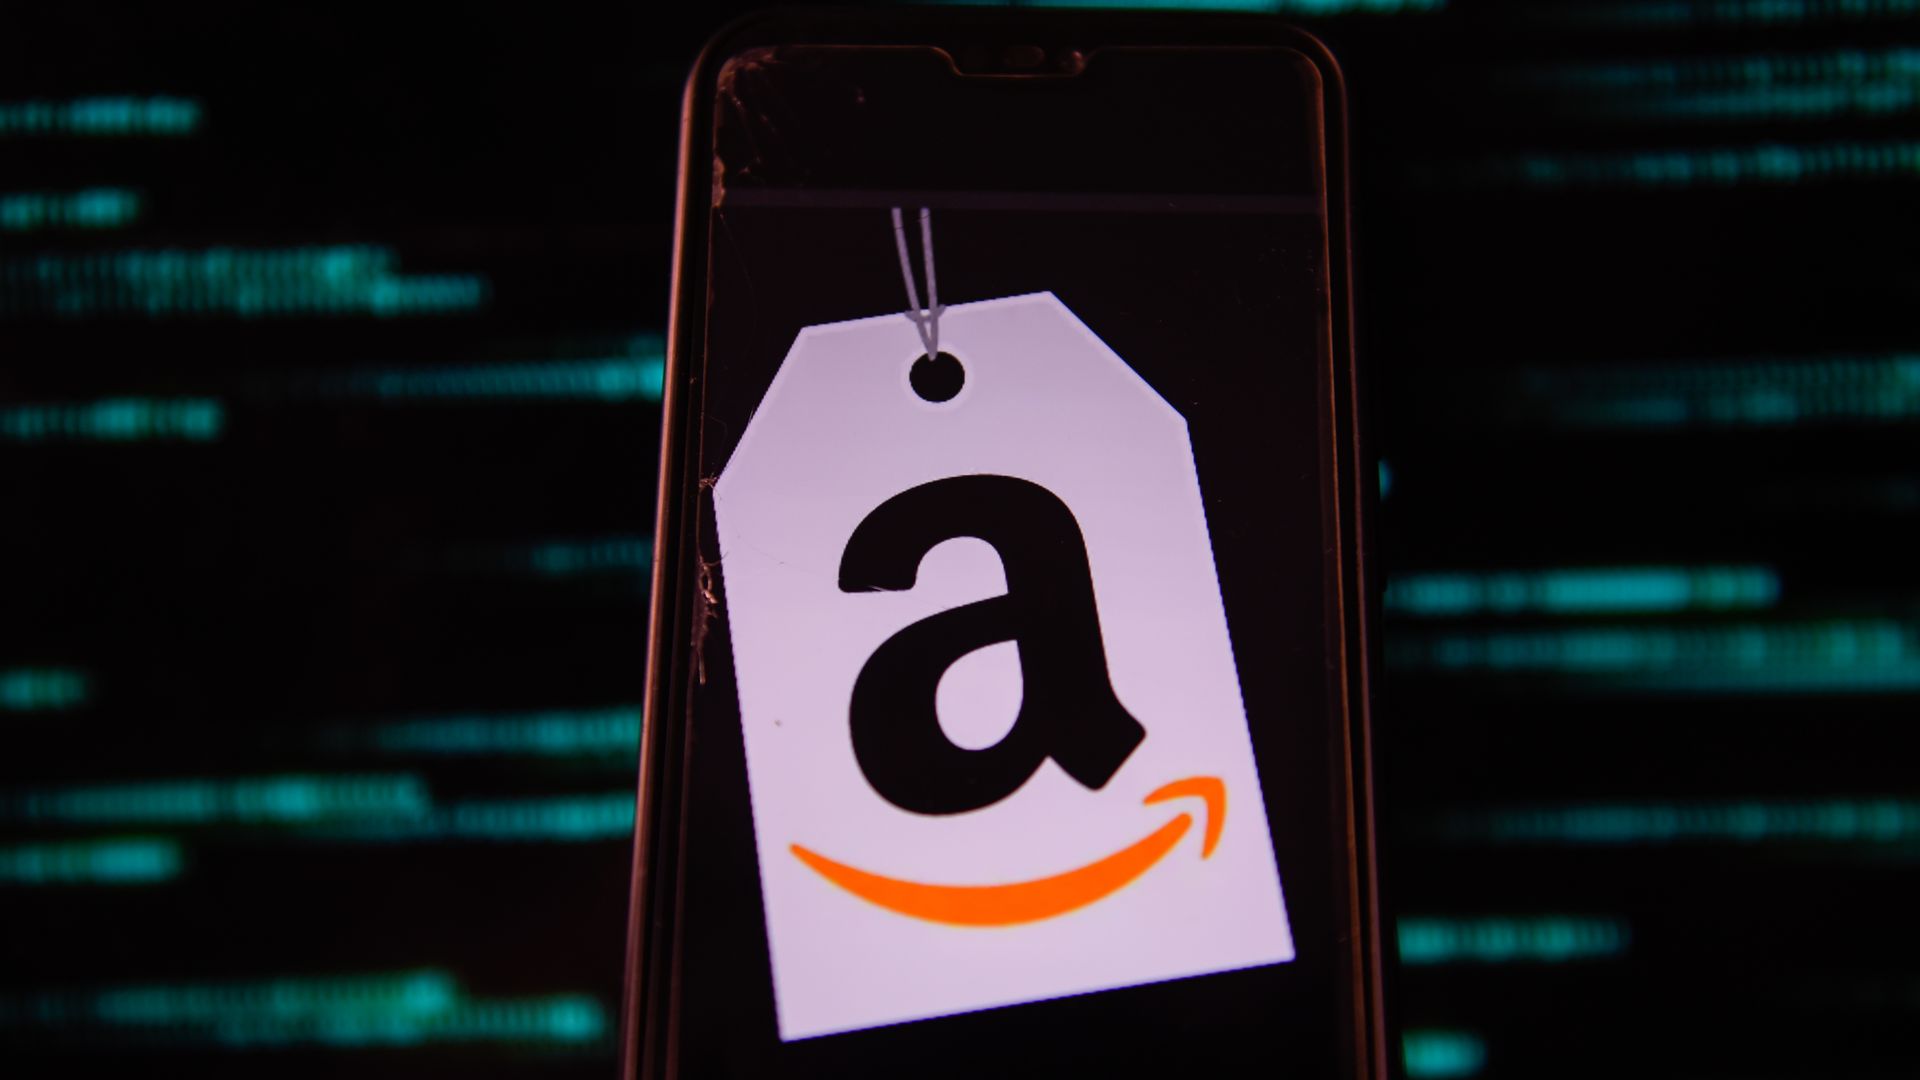 A photo illustration of a smartphone displaying the Amazon logo.